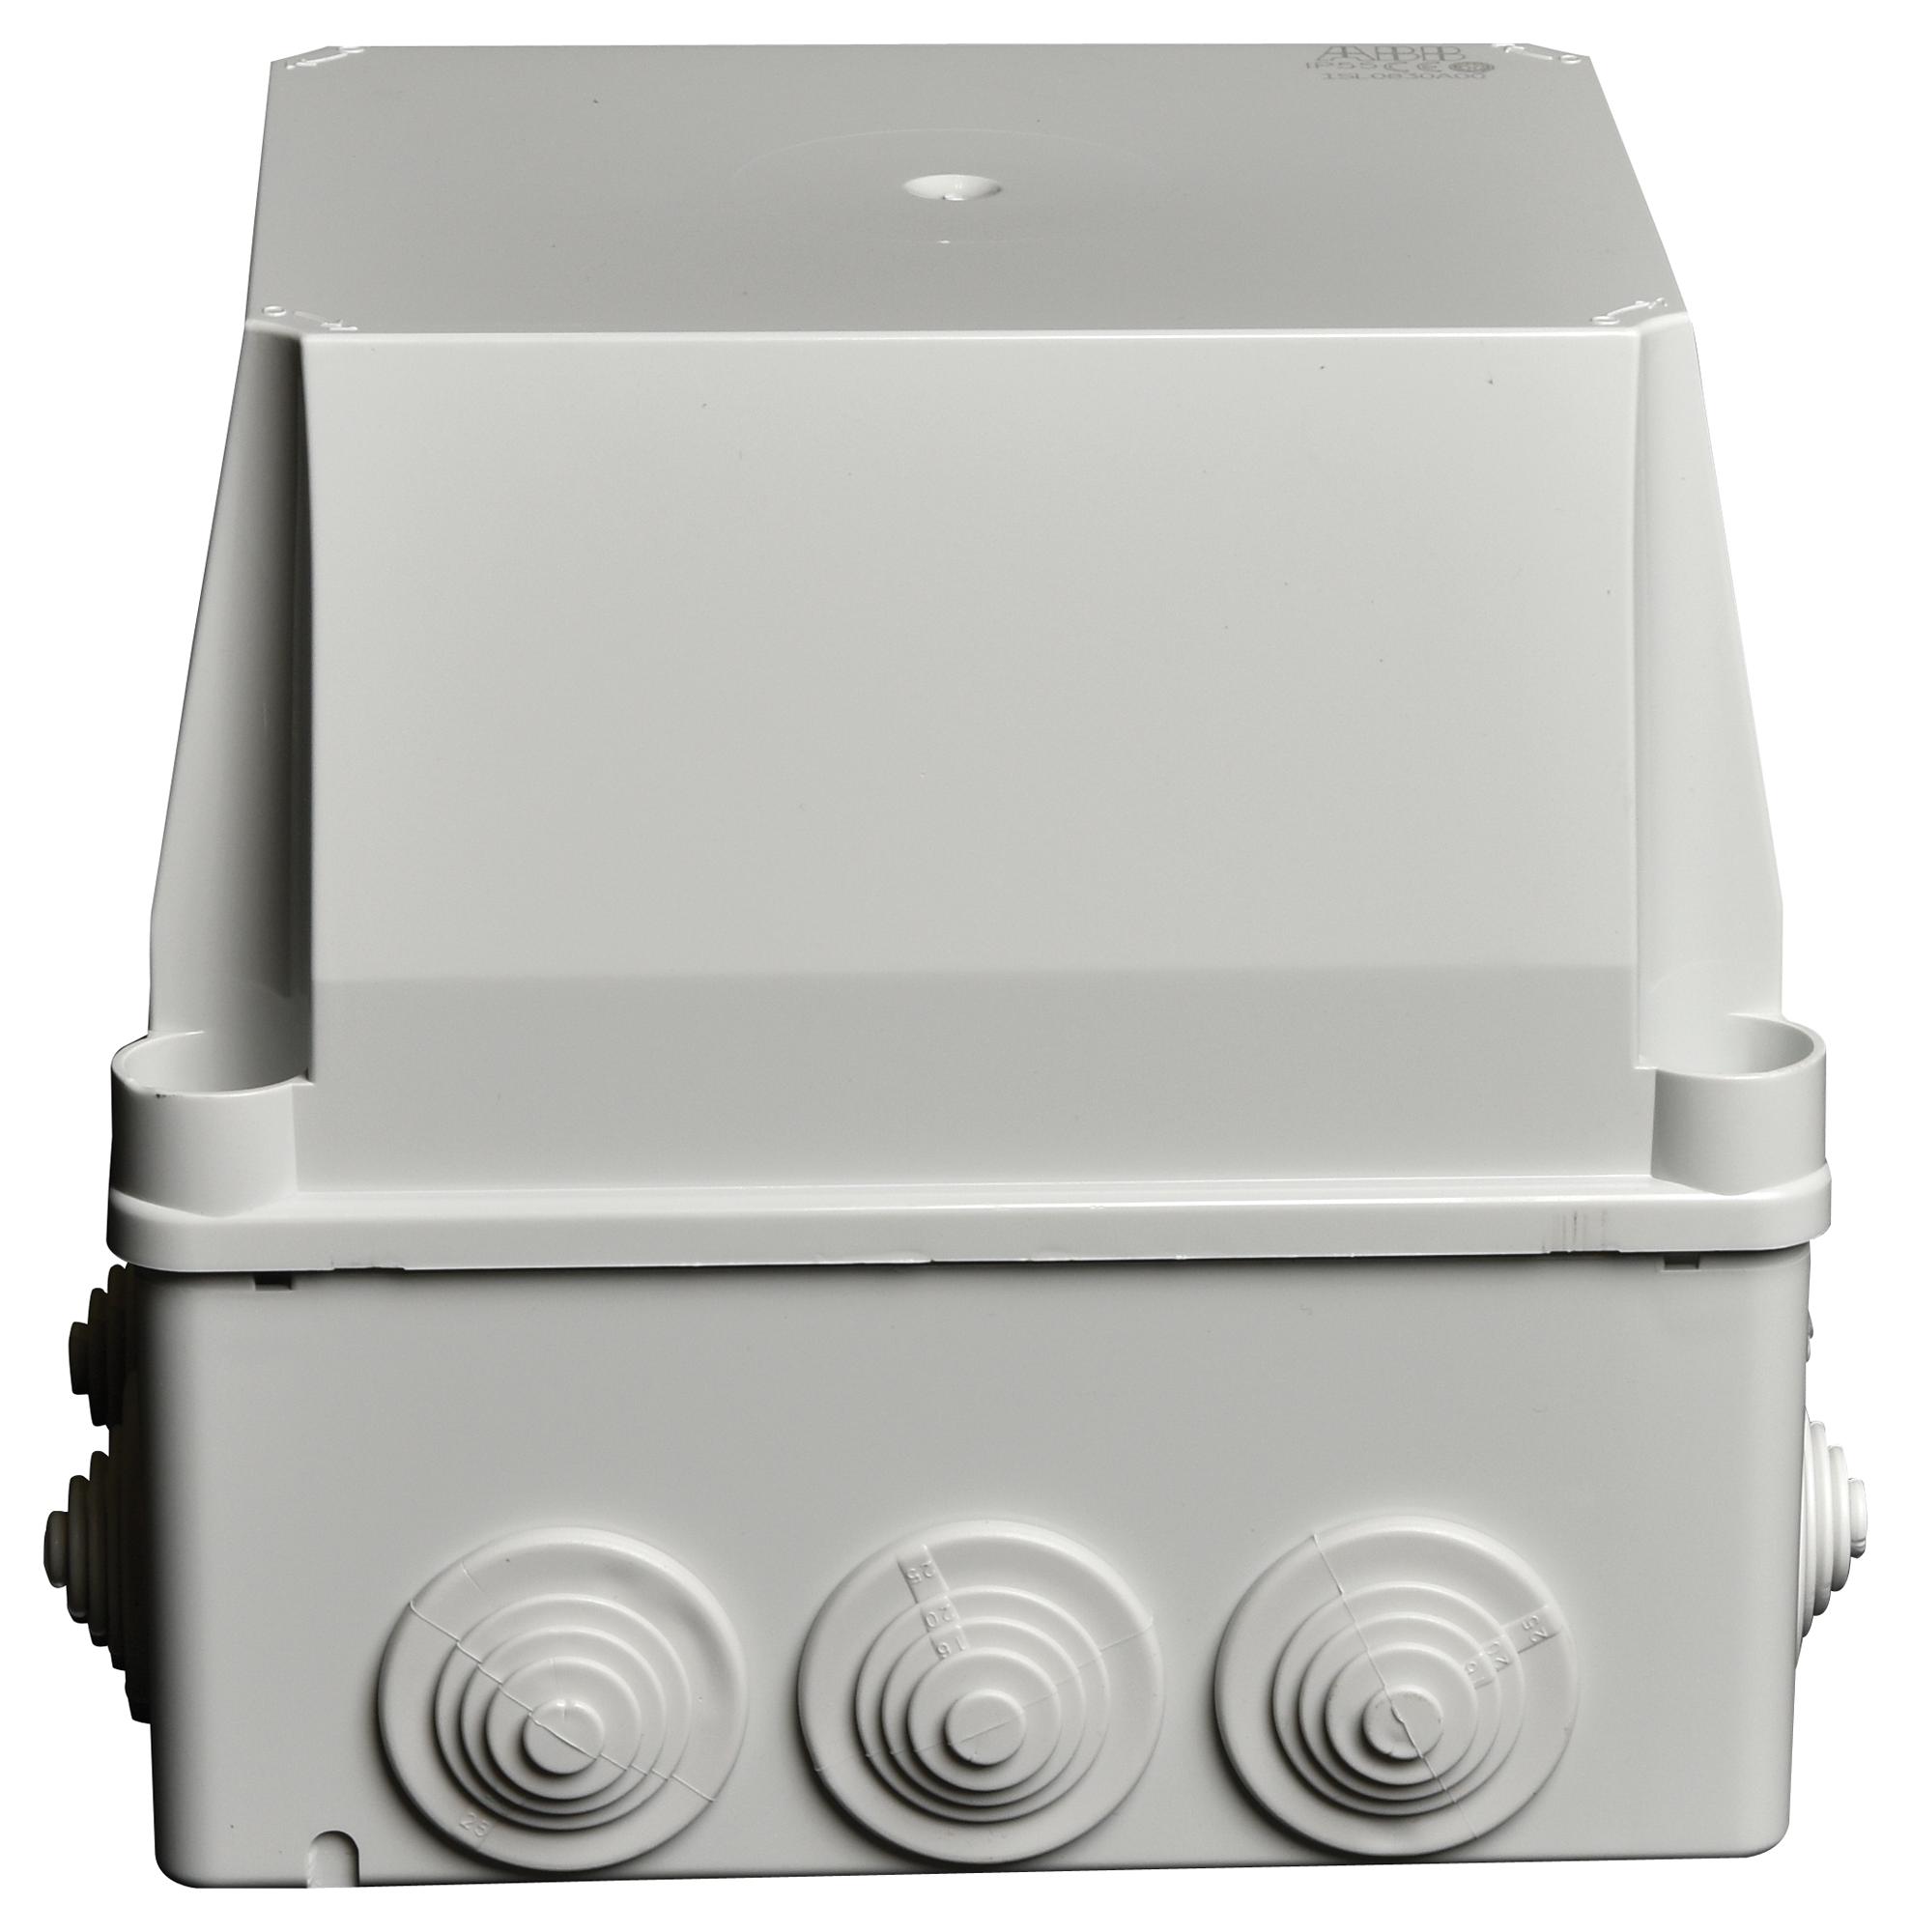 1SL0830A00 JUNCTION BOX, IP55, THERMOPLASTIC, GREY ABB